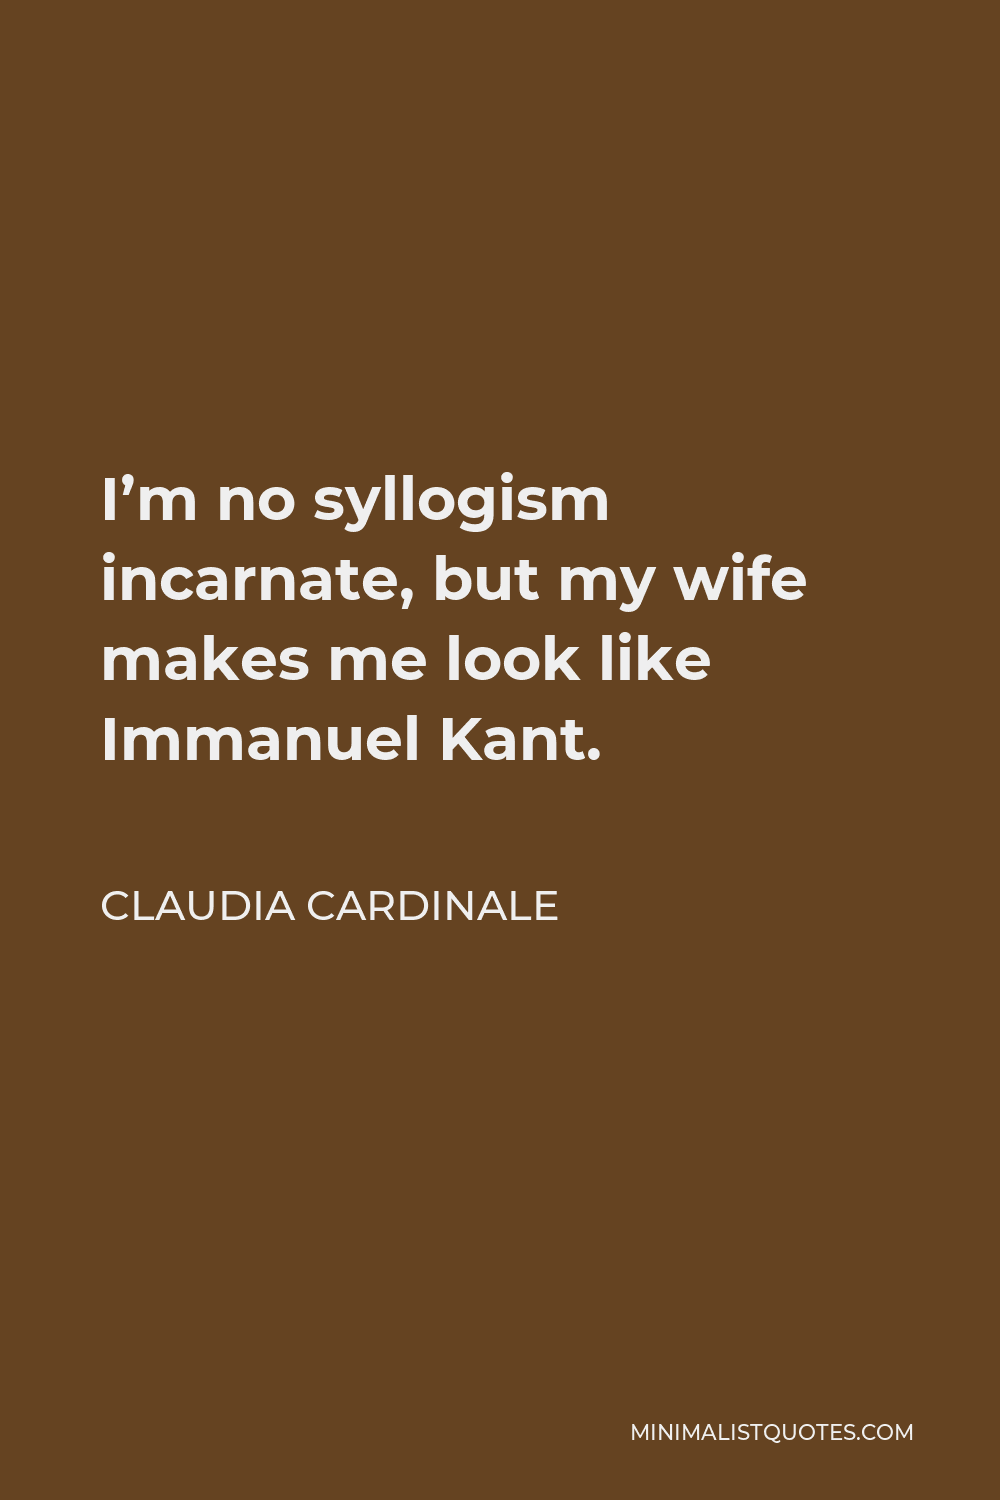 Claudia Cardinale Quote - I’m no syllogism incarnate, but my wife makes me look like Immanuel Kant.